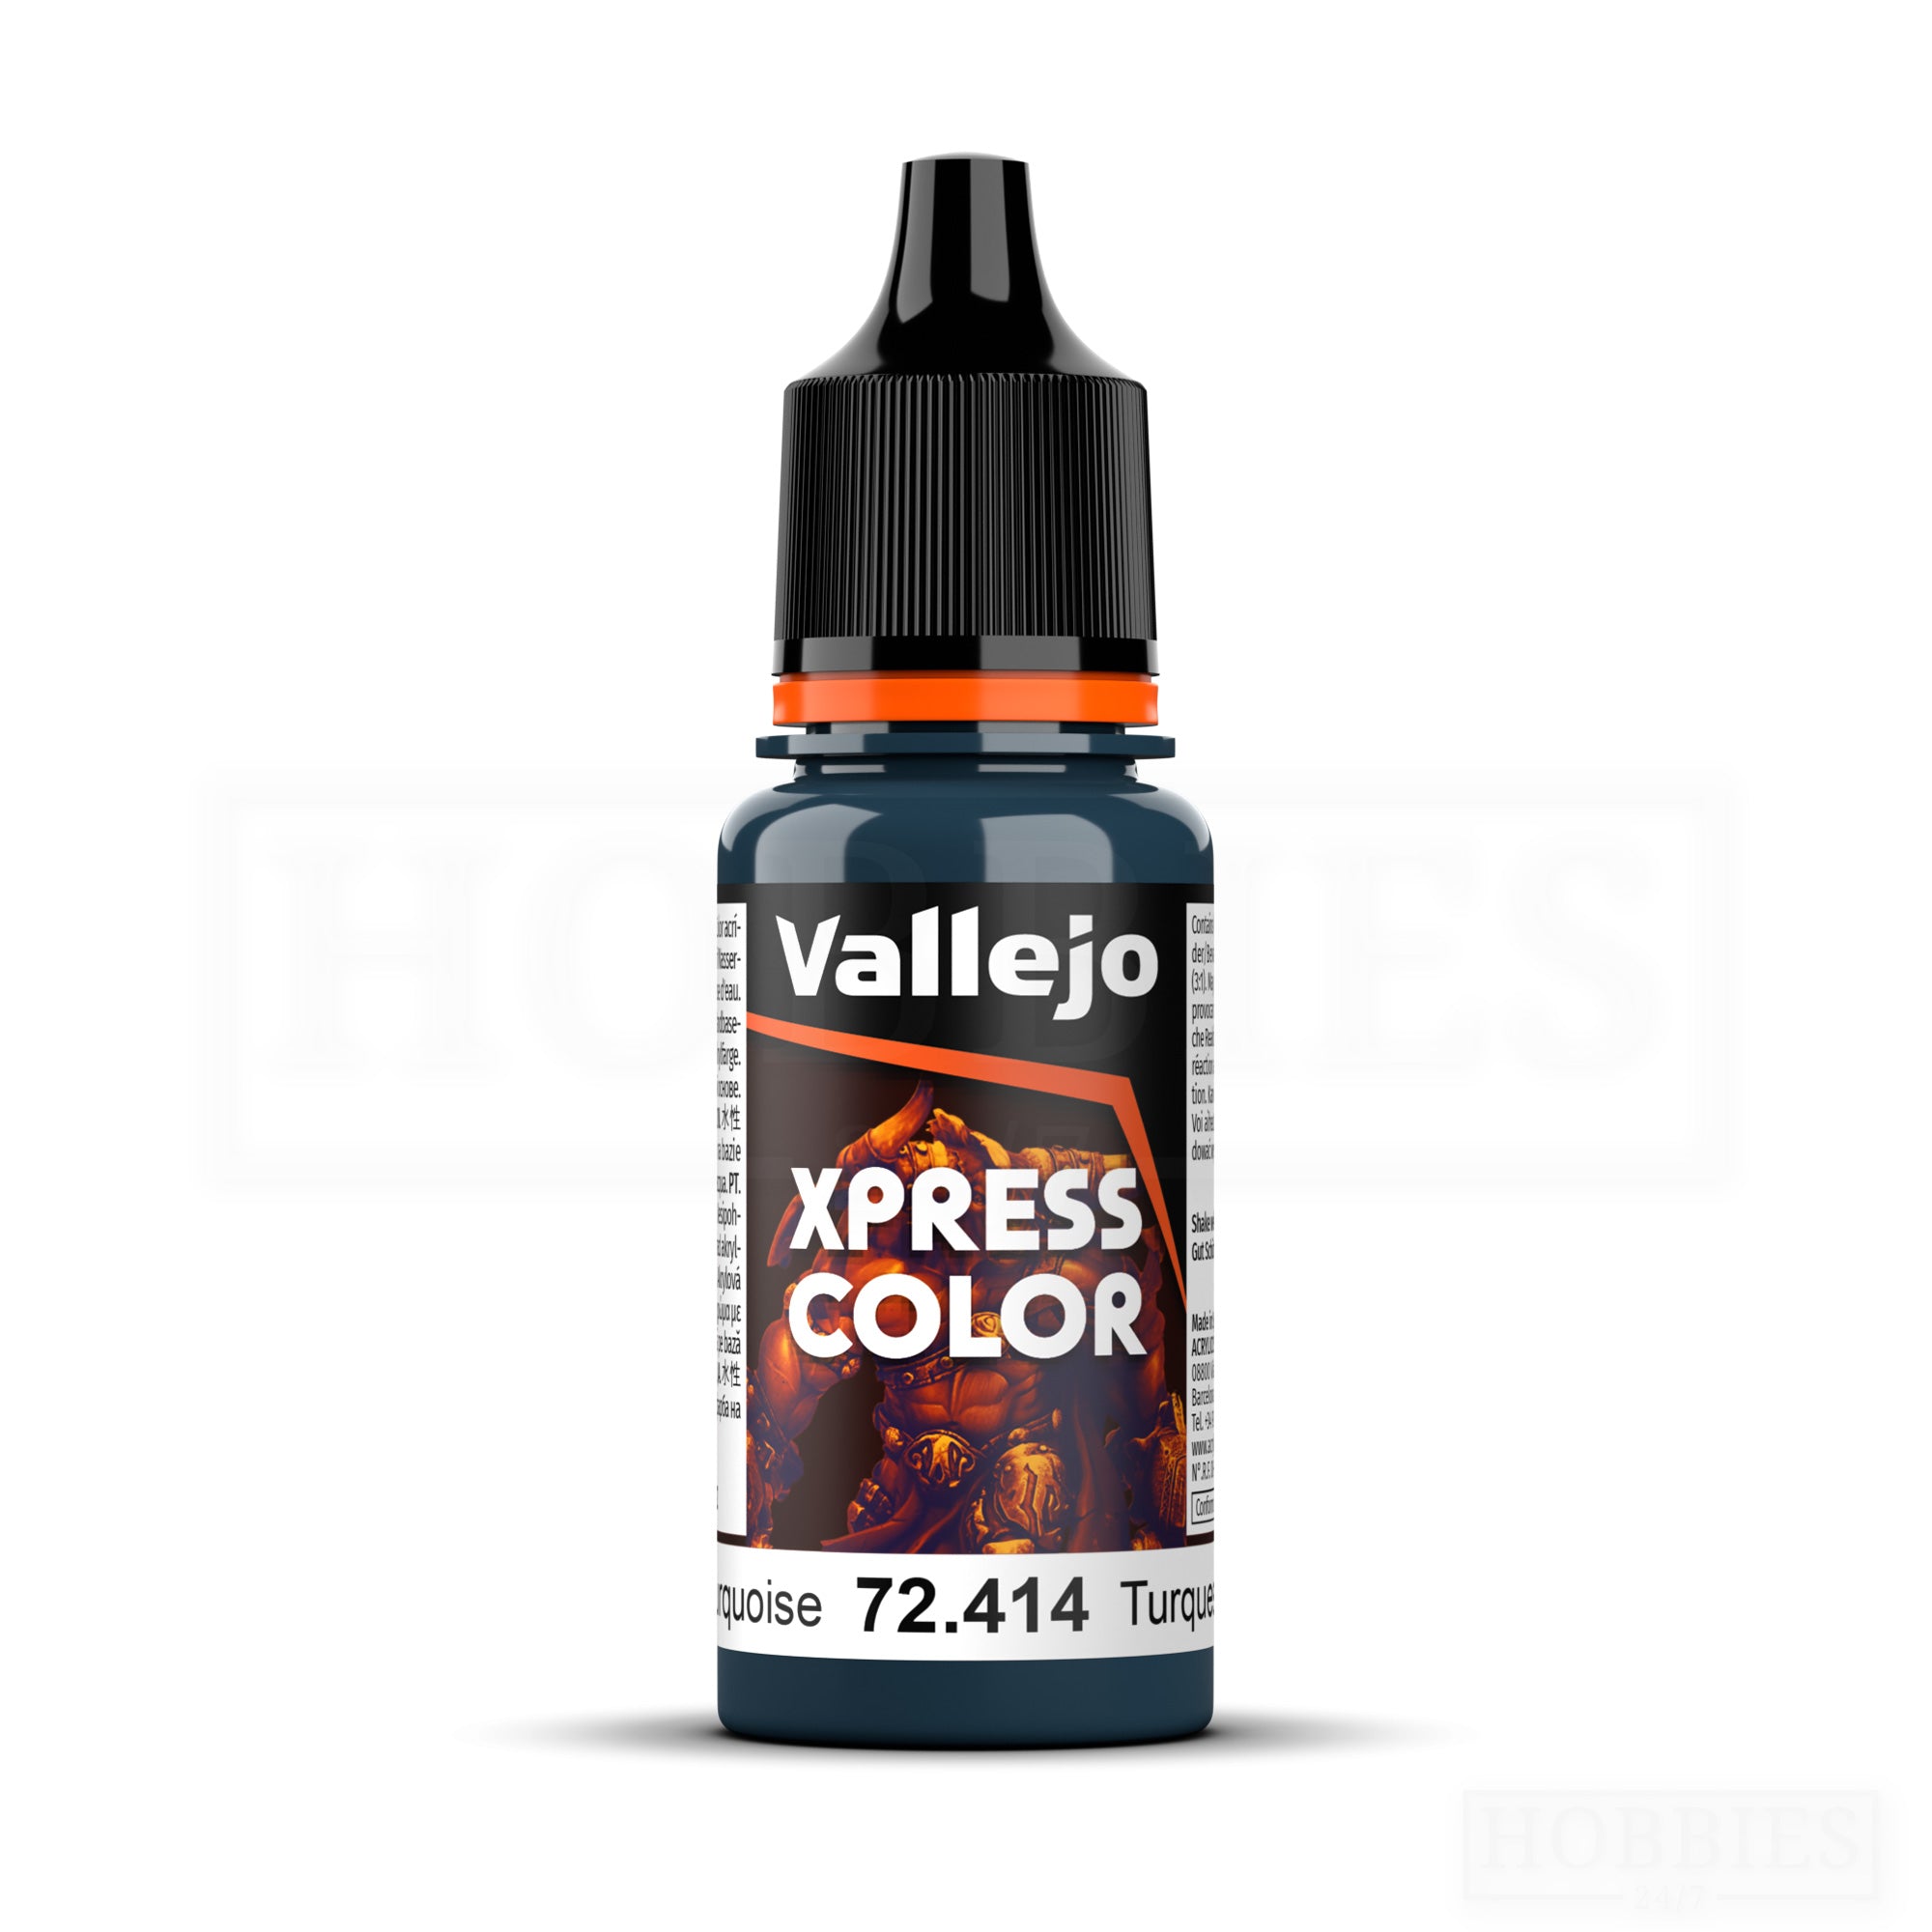 Vallejo Xpress Color Caribbean Turquoise 18ml